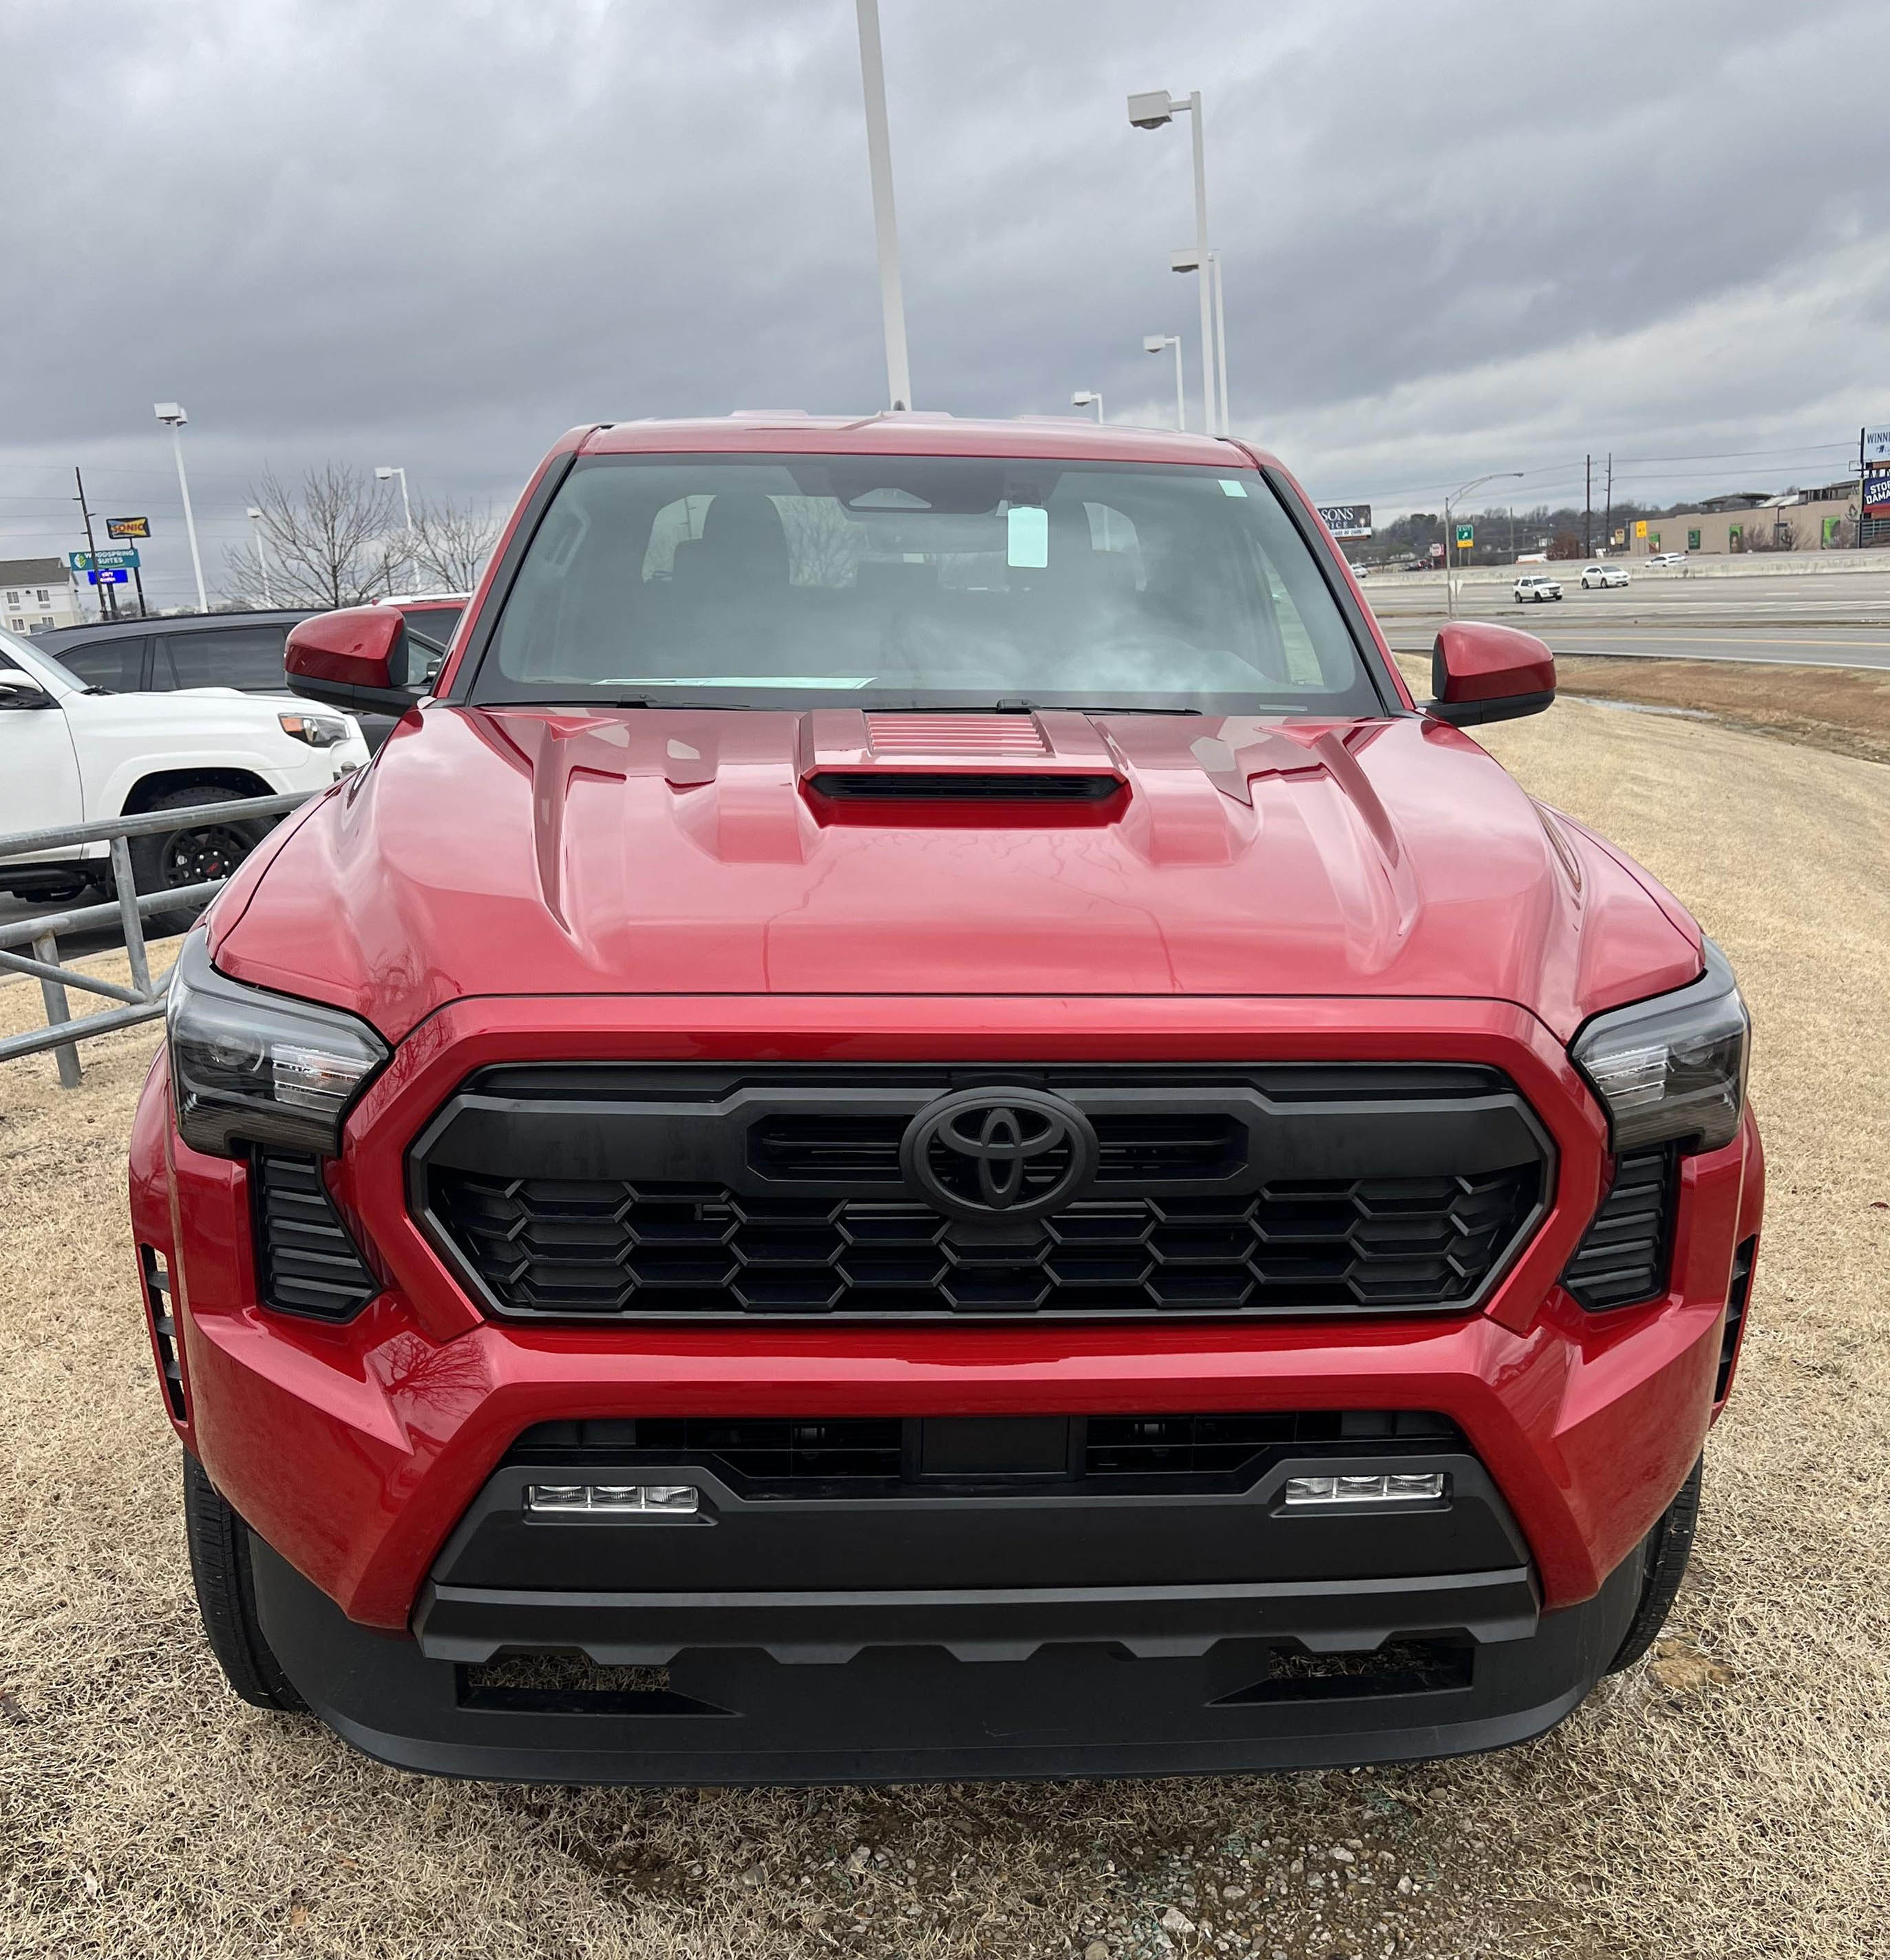 2024 Tacoma Long Bed 2024 Tacoma TRD Sport Double Cab in Supersonic Red (vs. Tundra photos) Long Bed 2024 Tacoma TRD Sport Double Cab in Supersonic Red 6